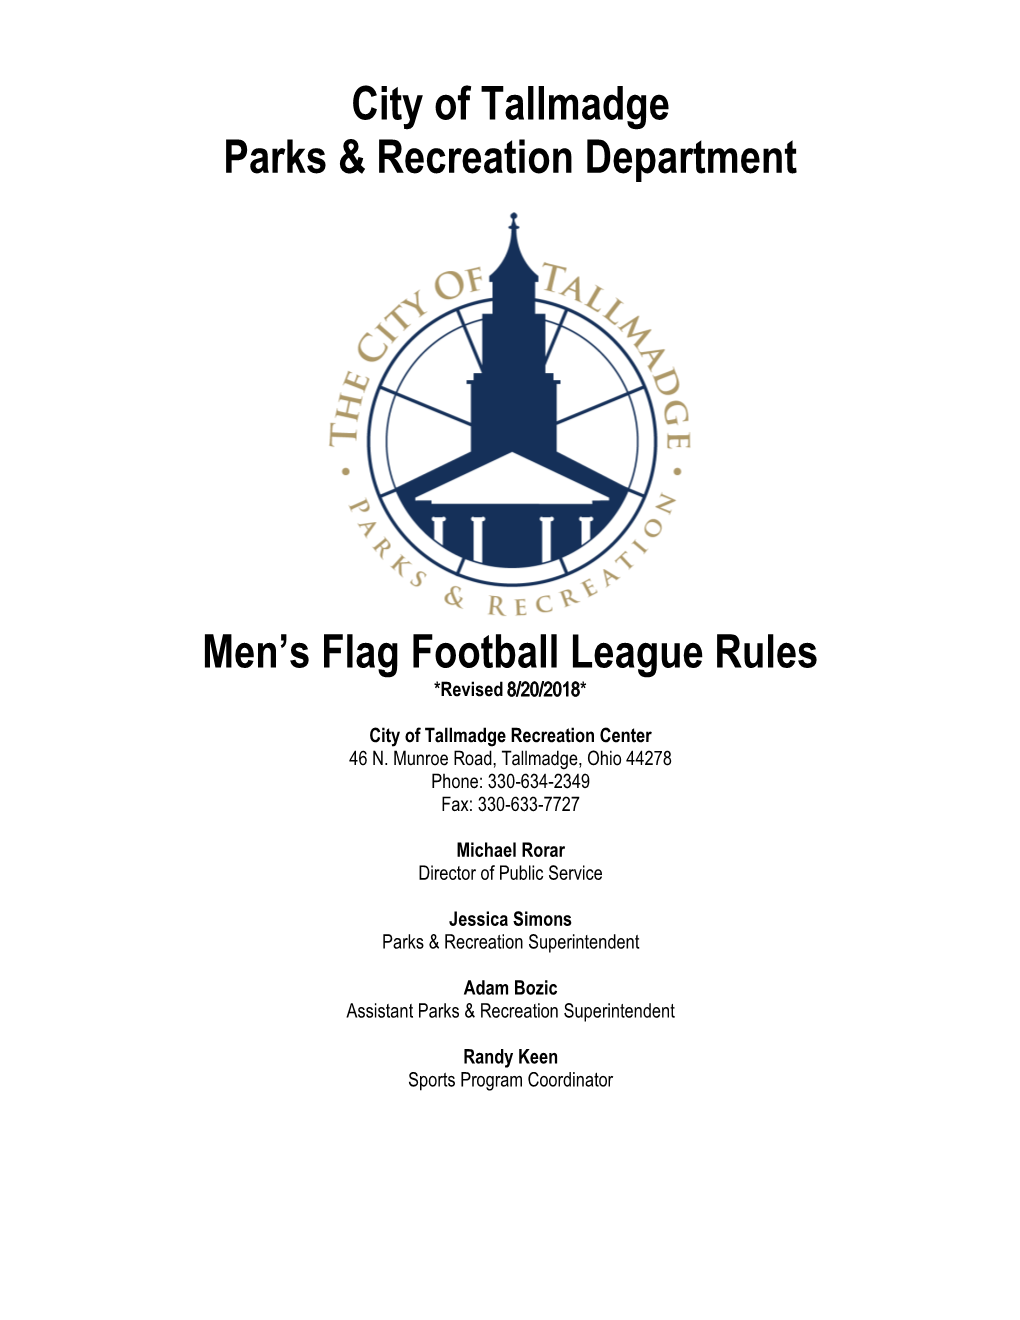 League Rules *Revised 8/20/2018*